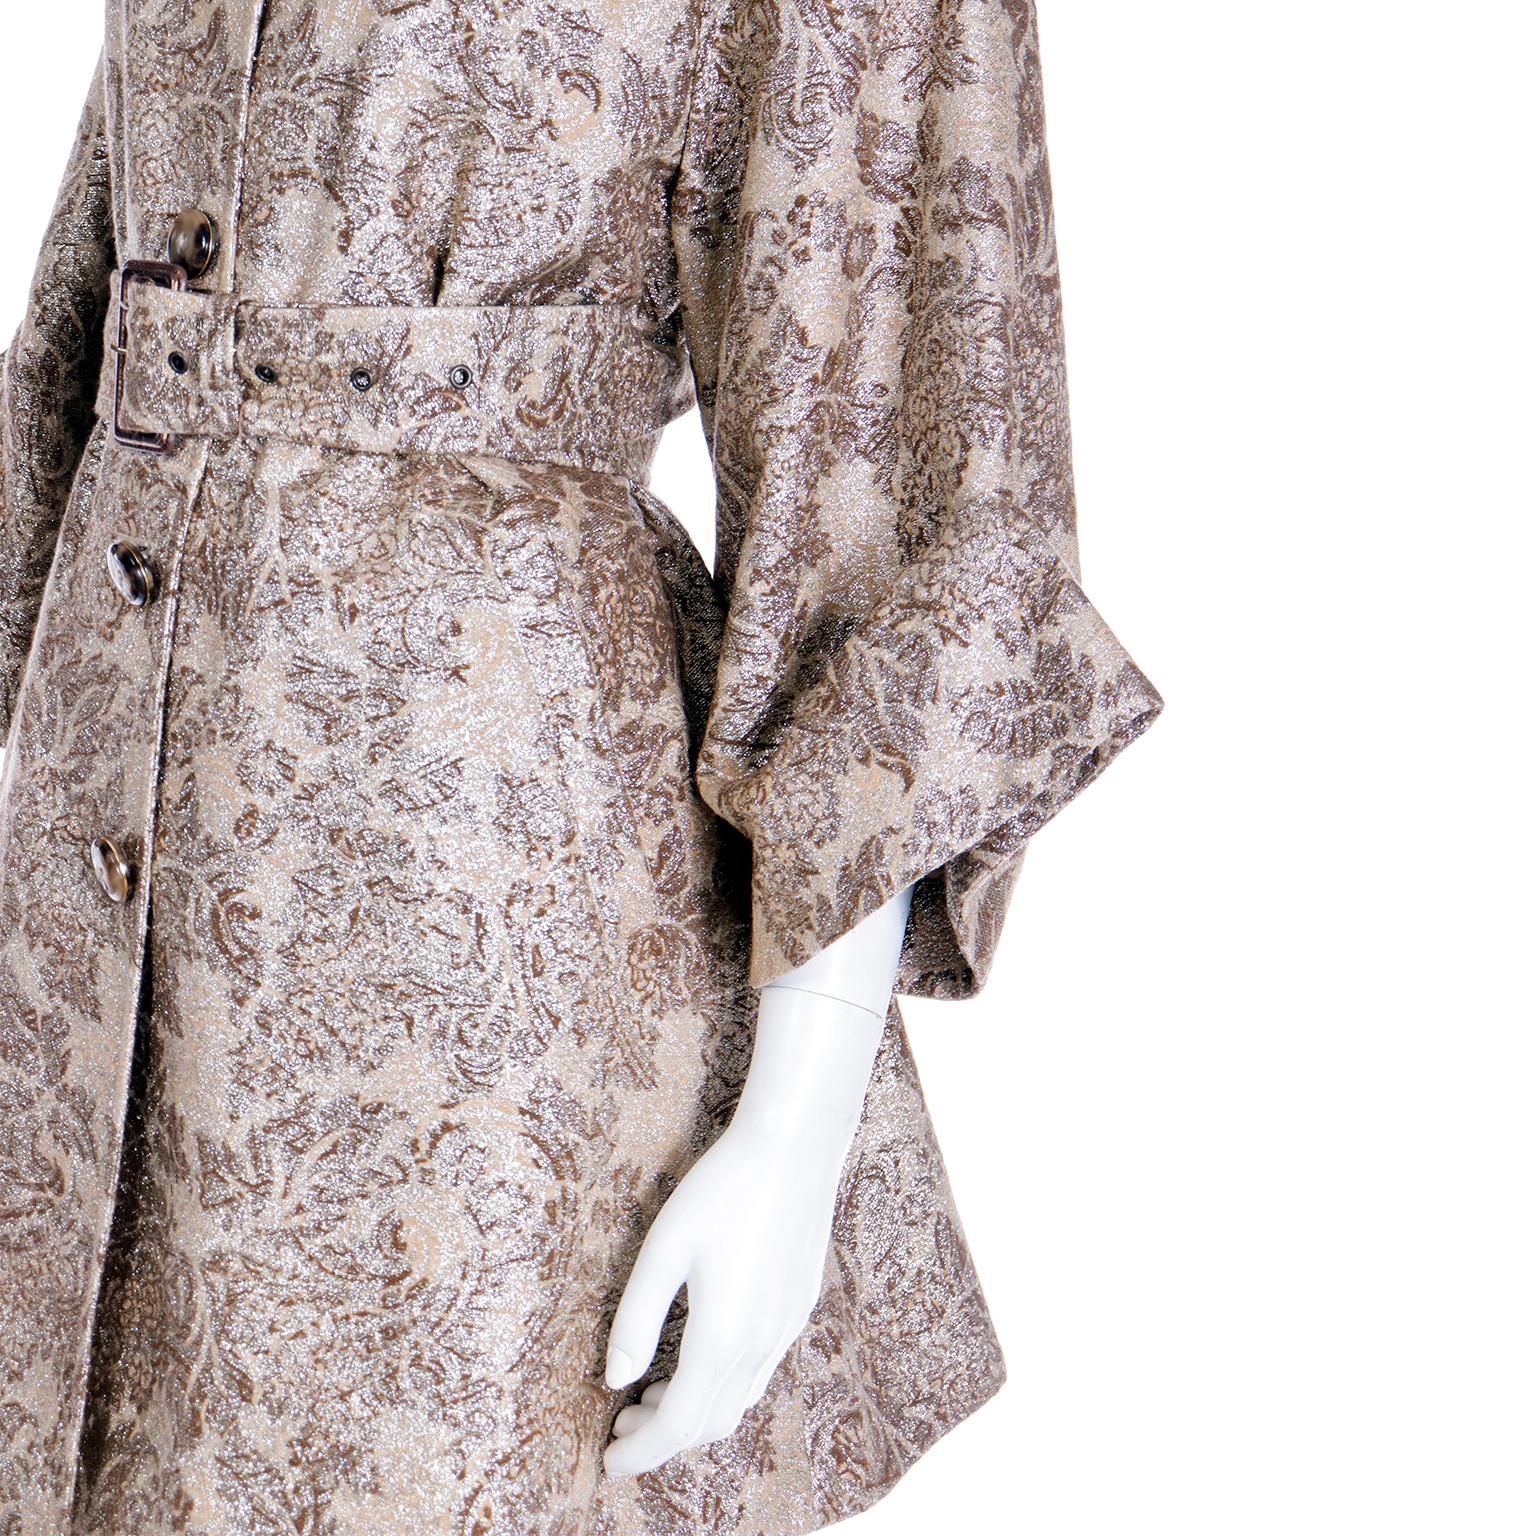 D&G Dolce & Gabbana Gold Floral Dress and Coat With Belt Amy Winehouse 2007 For Sale 9